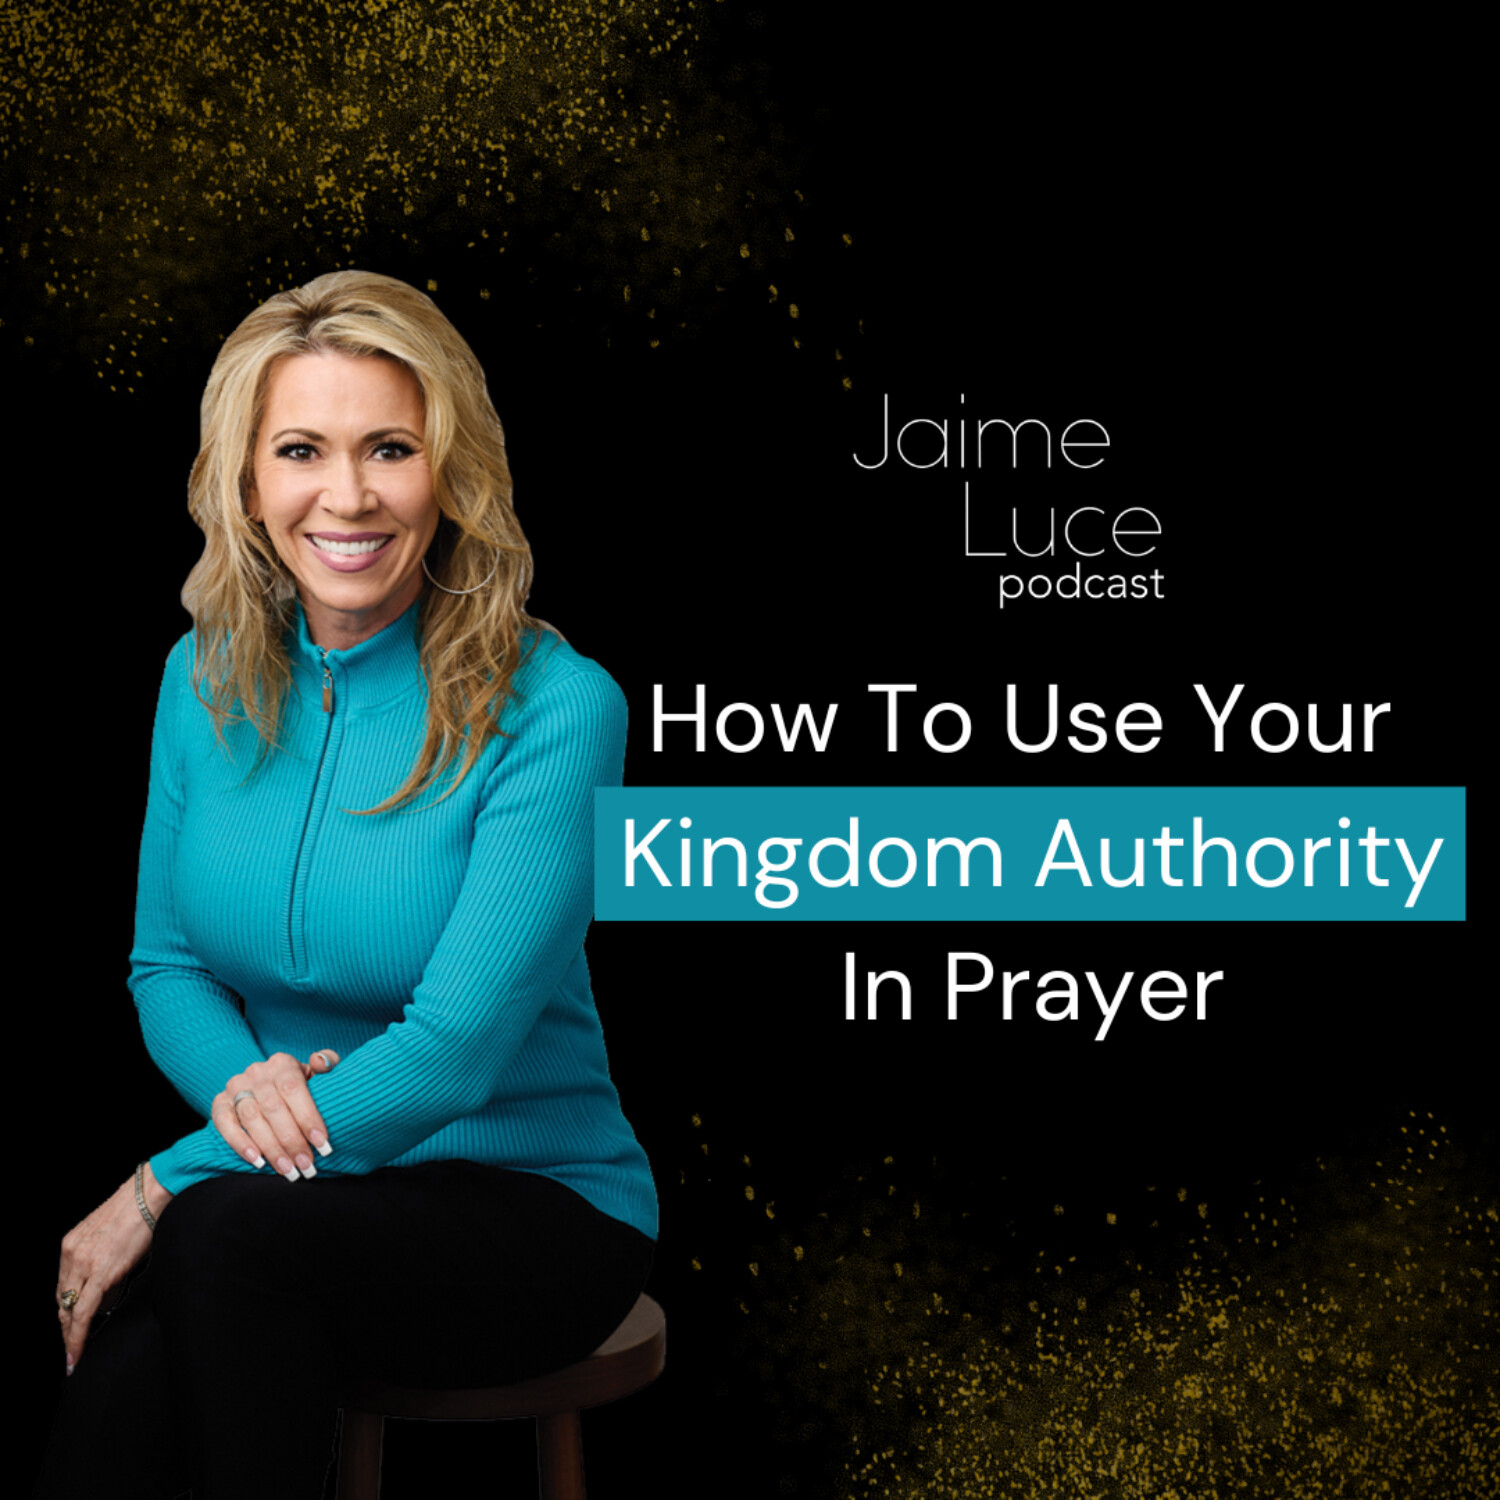 How To Use Your Kingdom Authority In Prayer